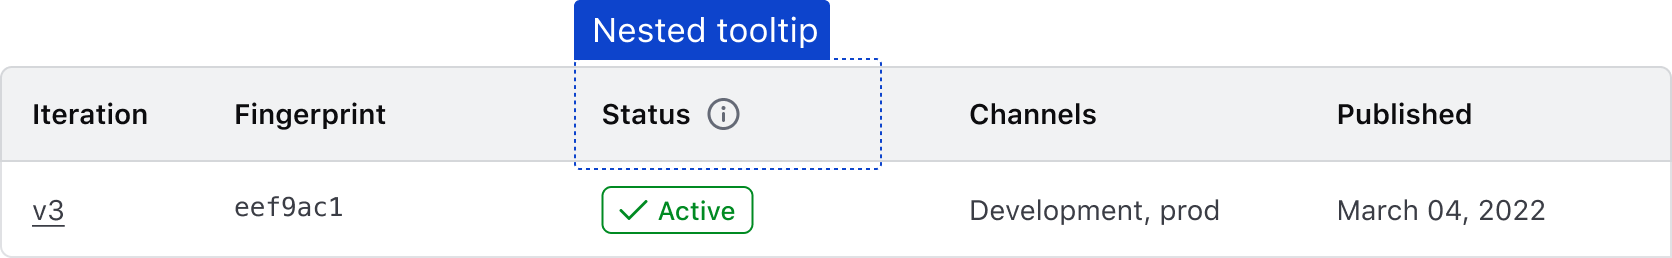 Example of a nested tooltip within a table header